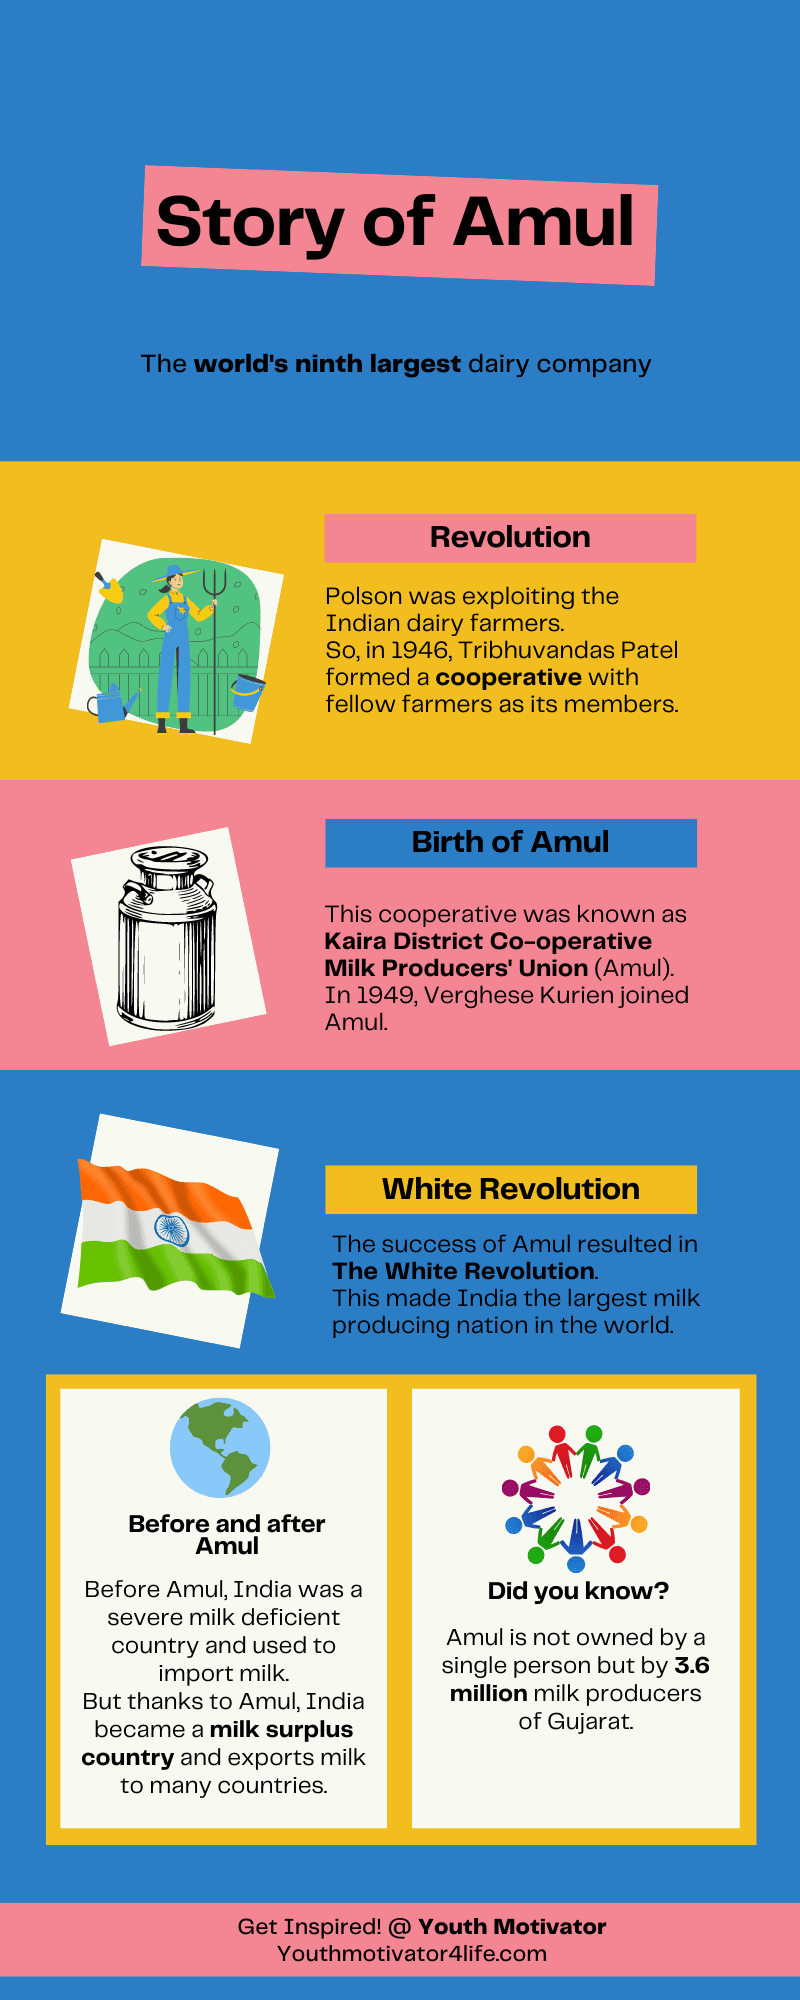 An infographic on story of Amul